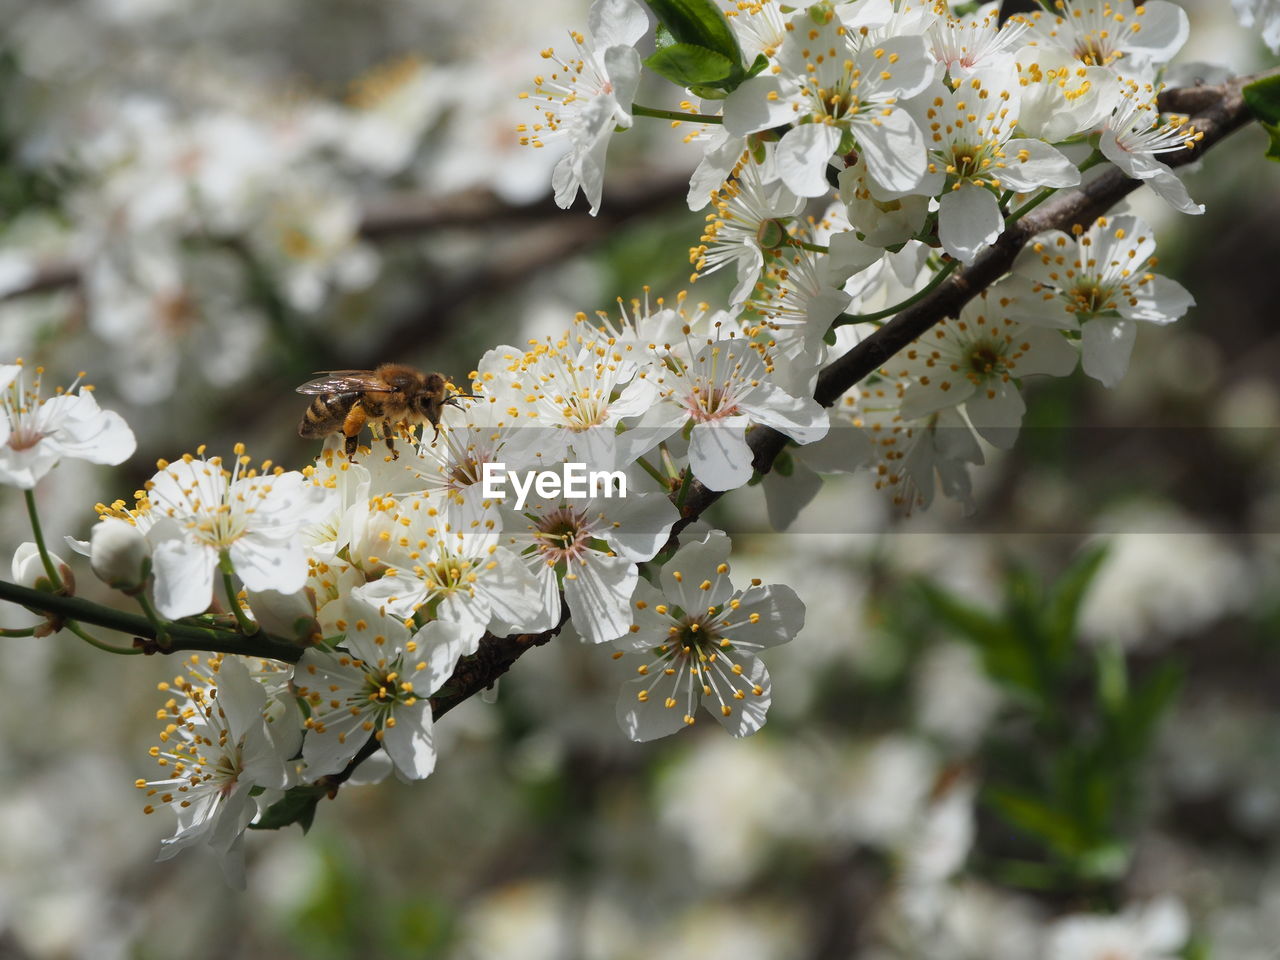 CLOSE-UP OF CHERRY BLOSSOMS ON TREE